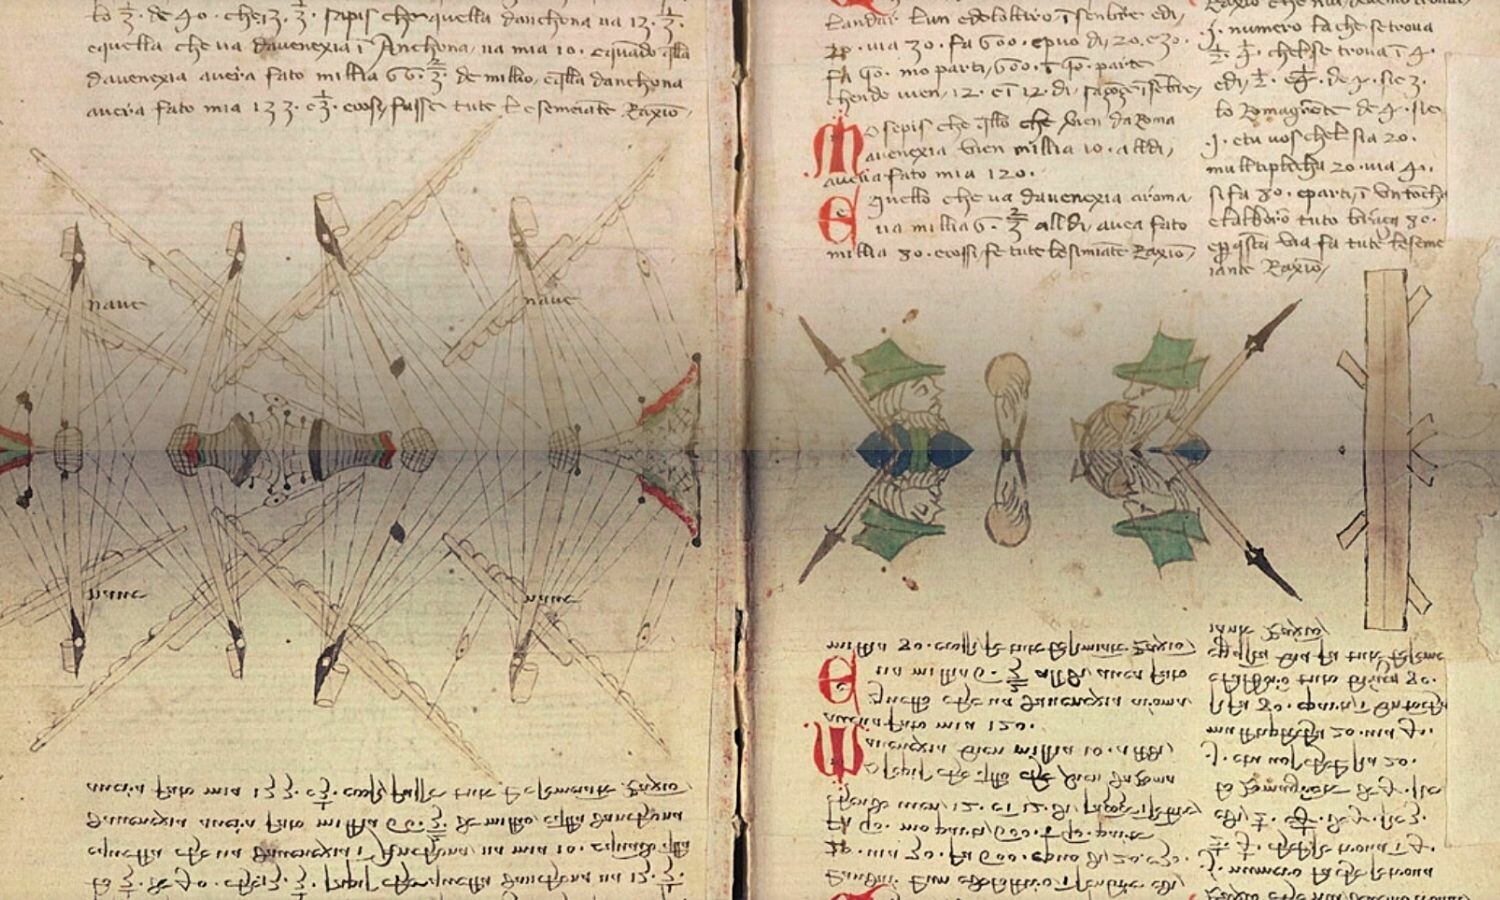 An image of a commonplace book with a horizontal mirror effect.